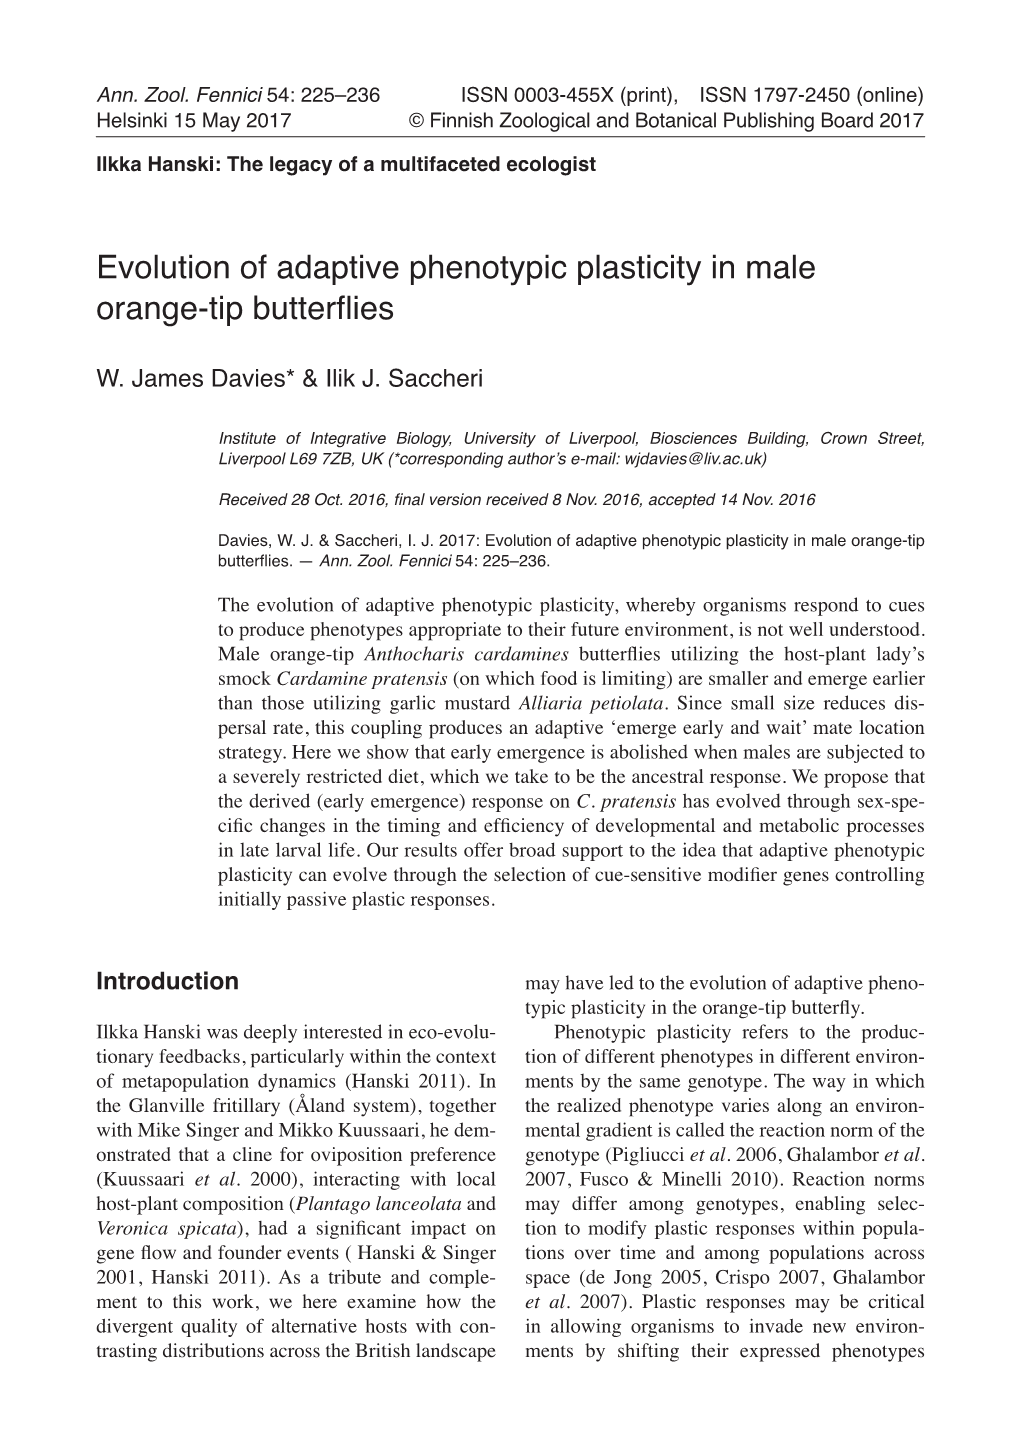 Evolution of Adaptive Phenotypic Plasticity in Male Orange-Tip Butterflies